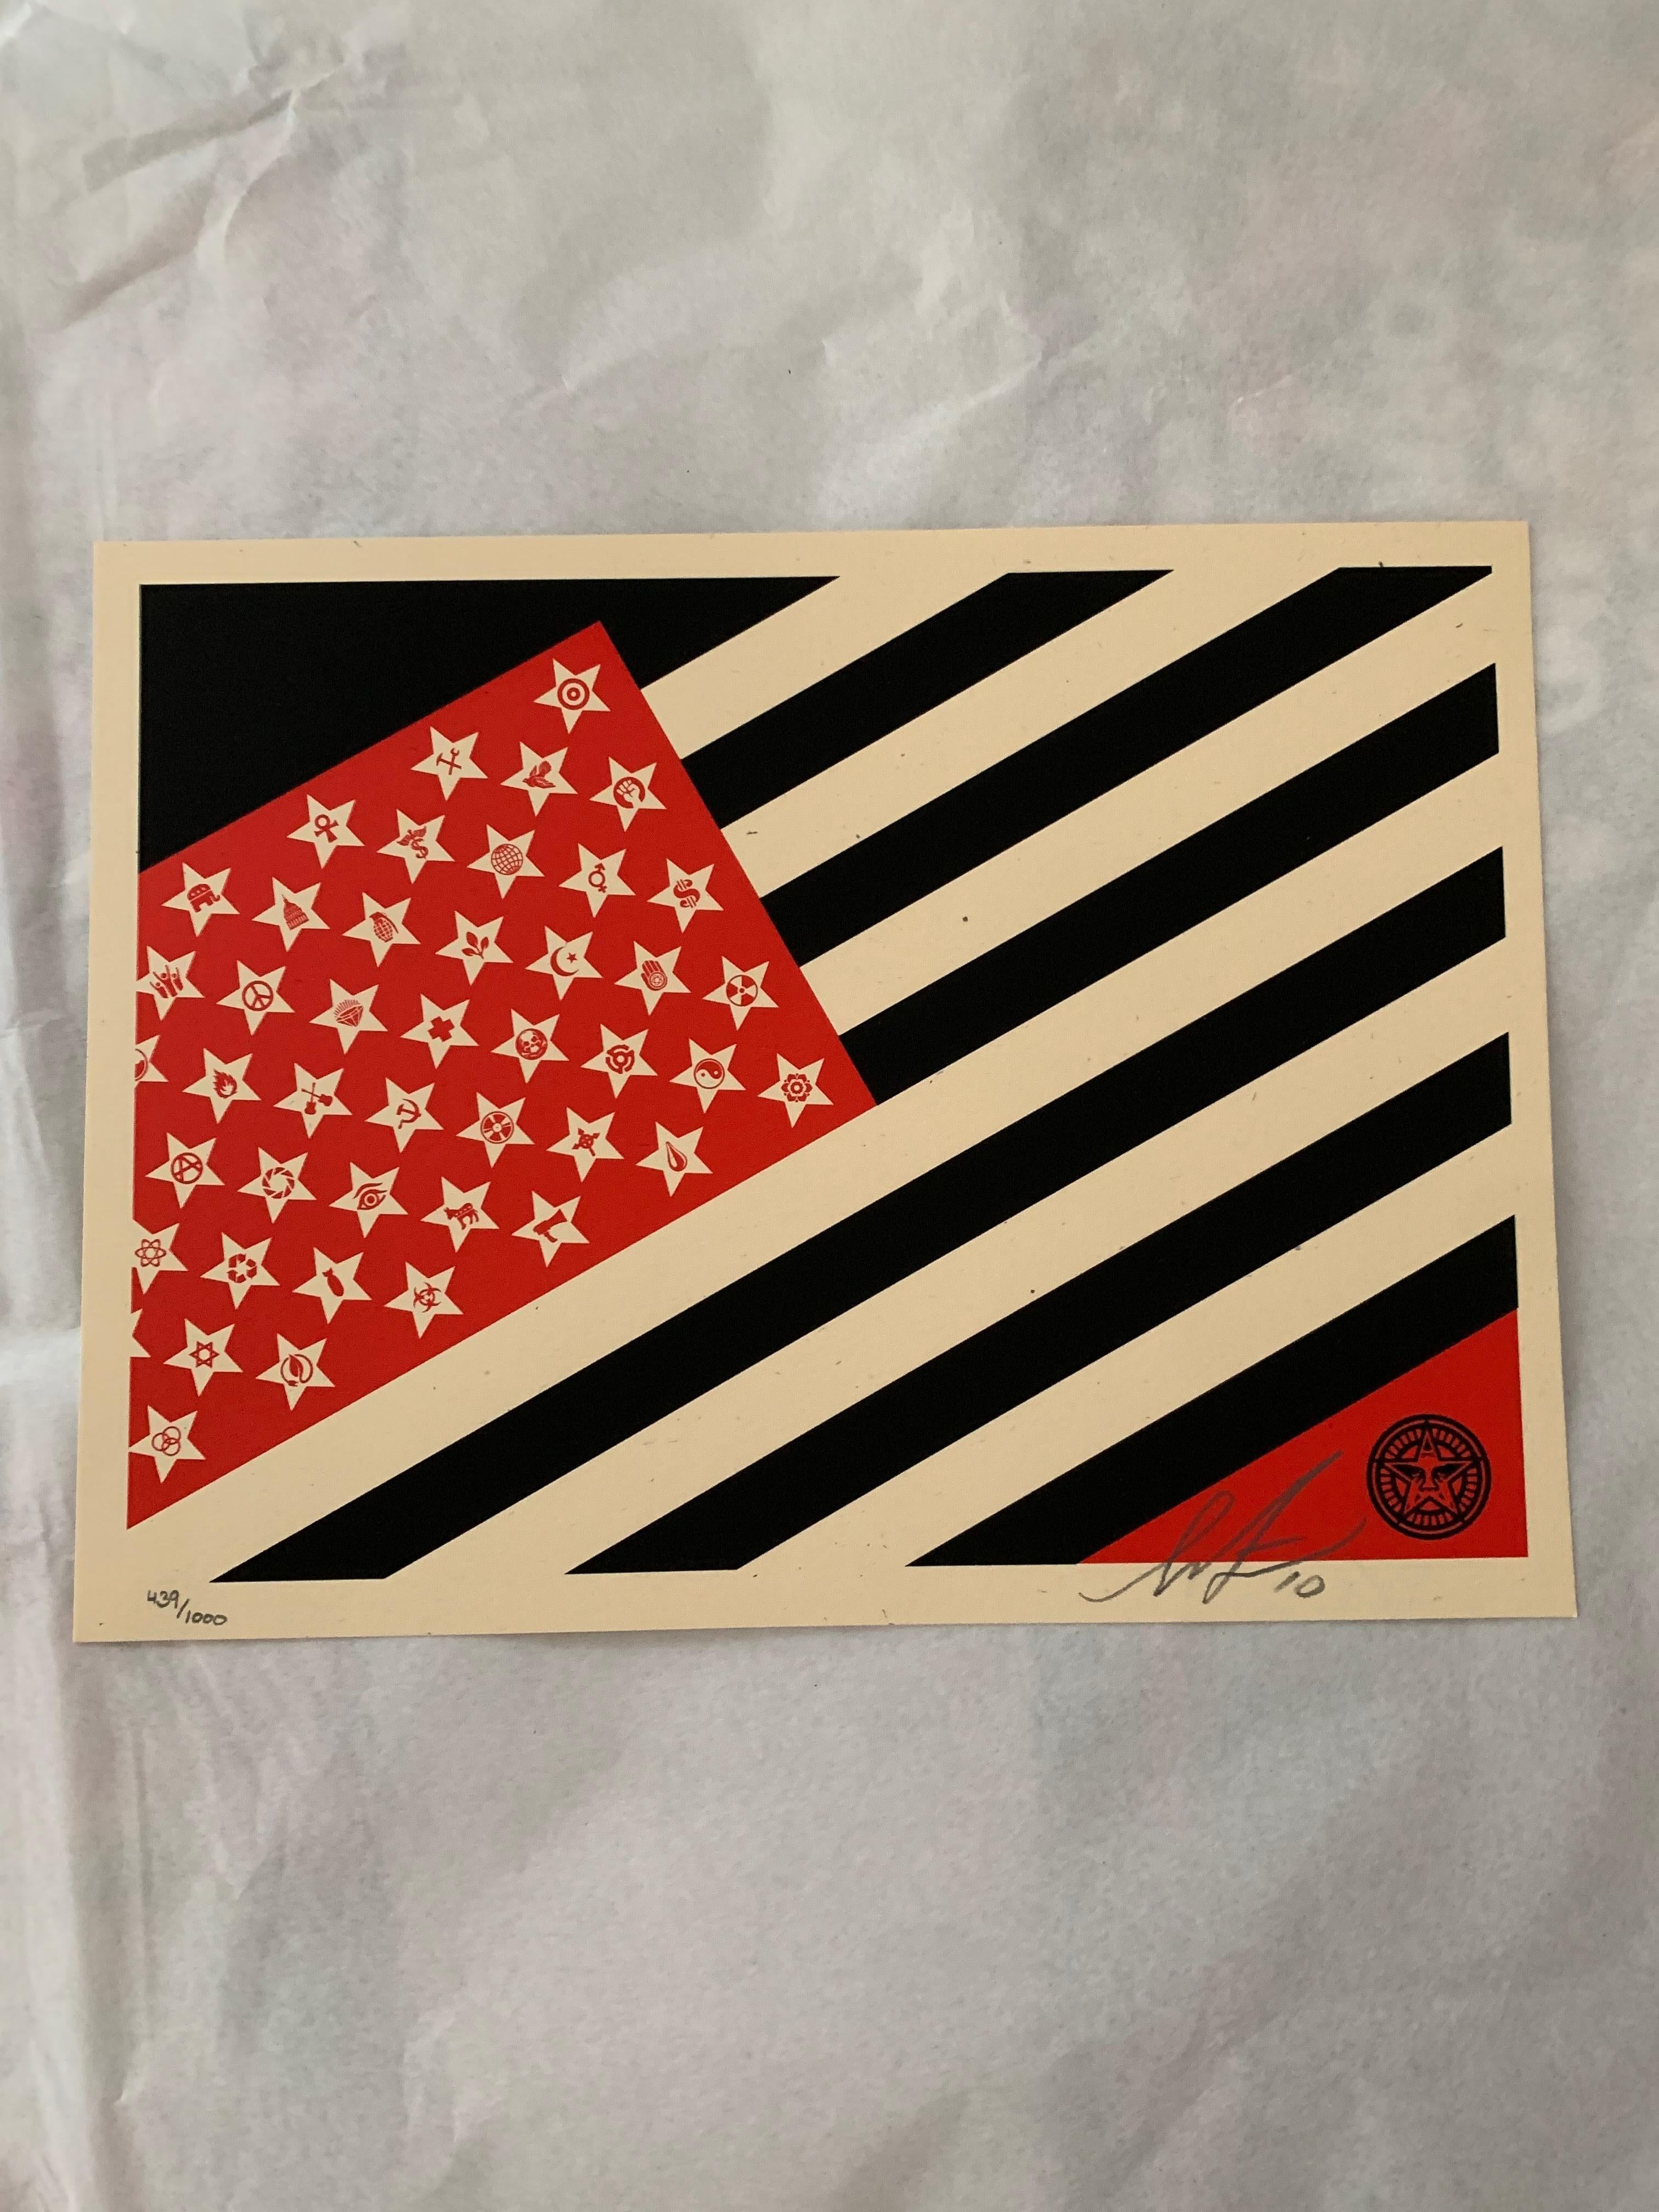 Shepard Fairey Figurative Print - Signed and Numbered Small Mayday Flag screenprint from 2010